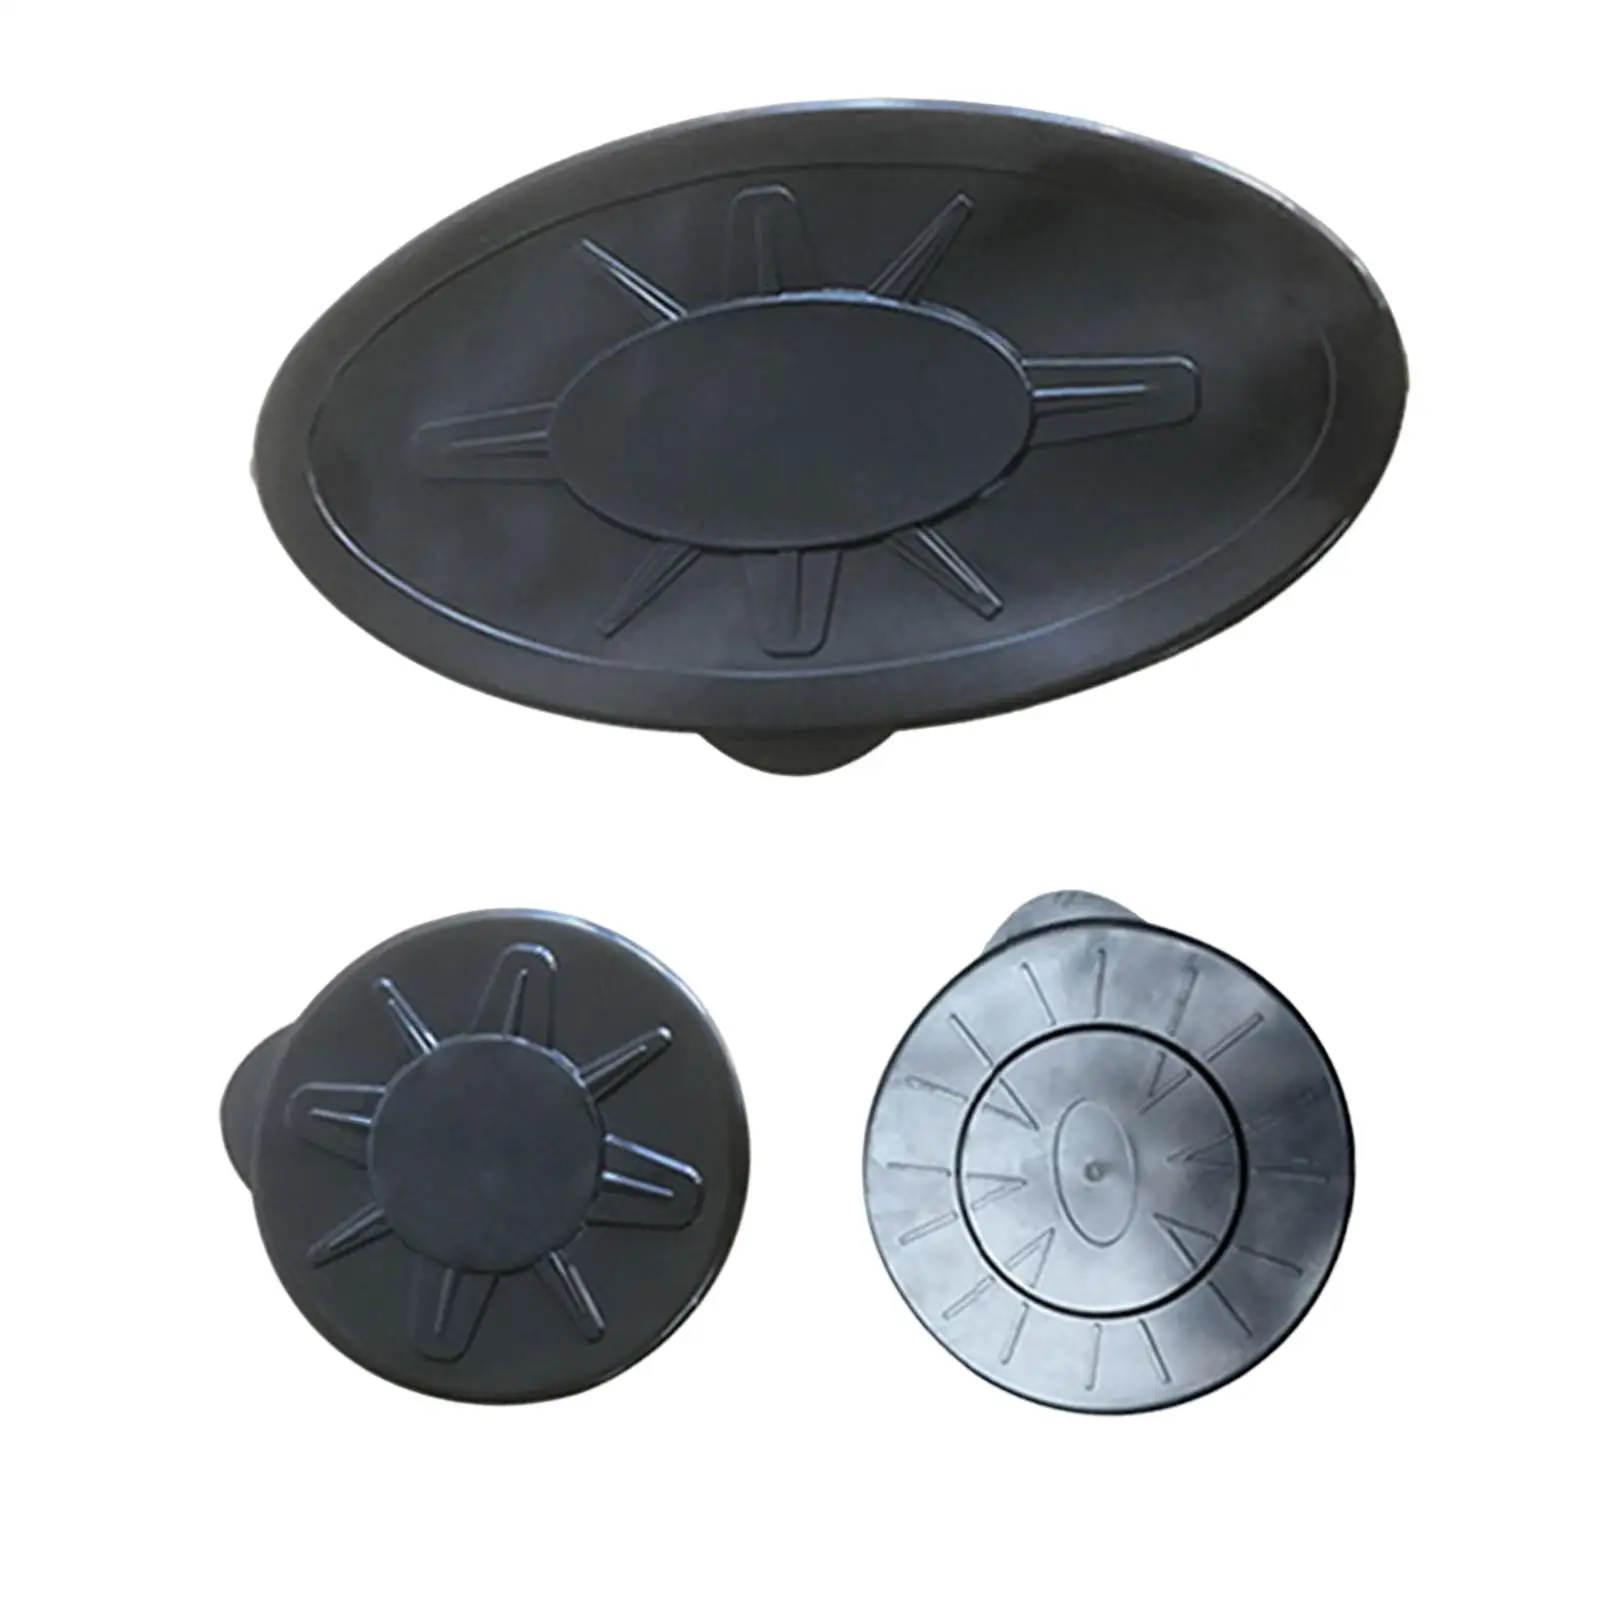 Kayakes Boat Sealing 9 inch Accessories Round/Oval Plate Access